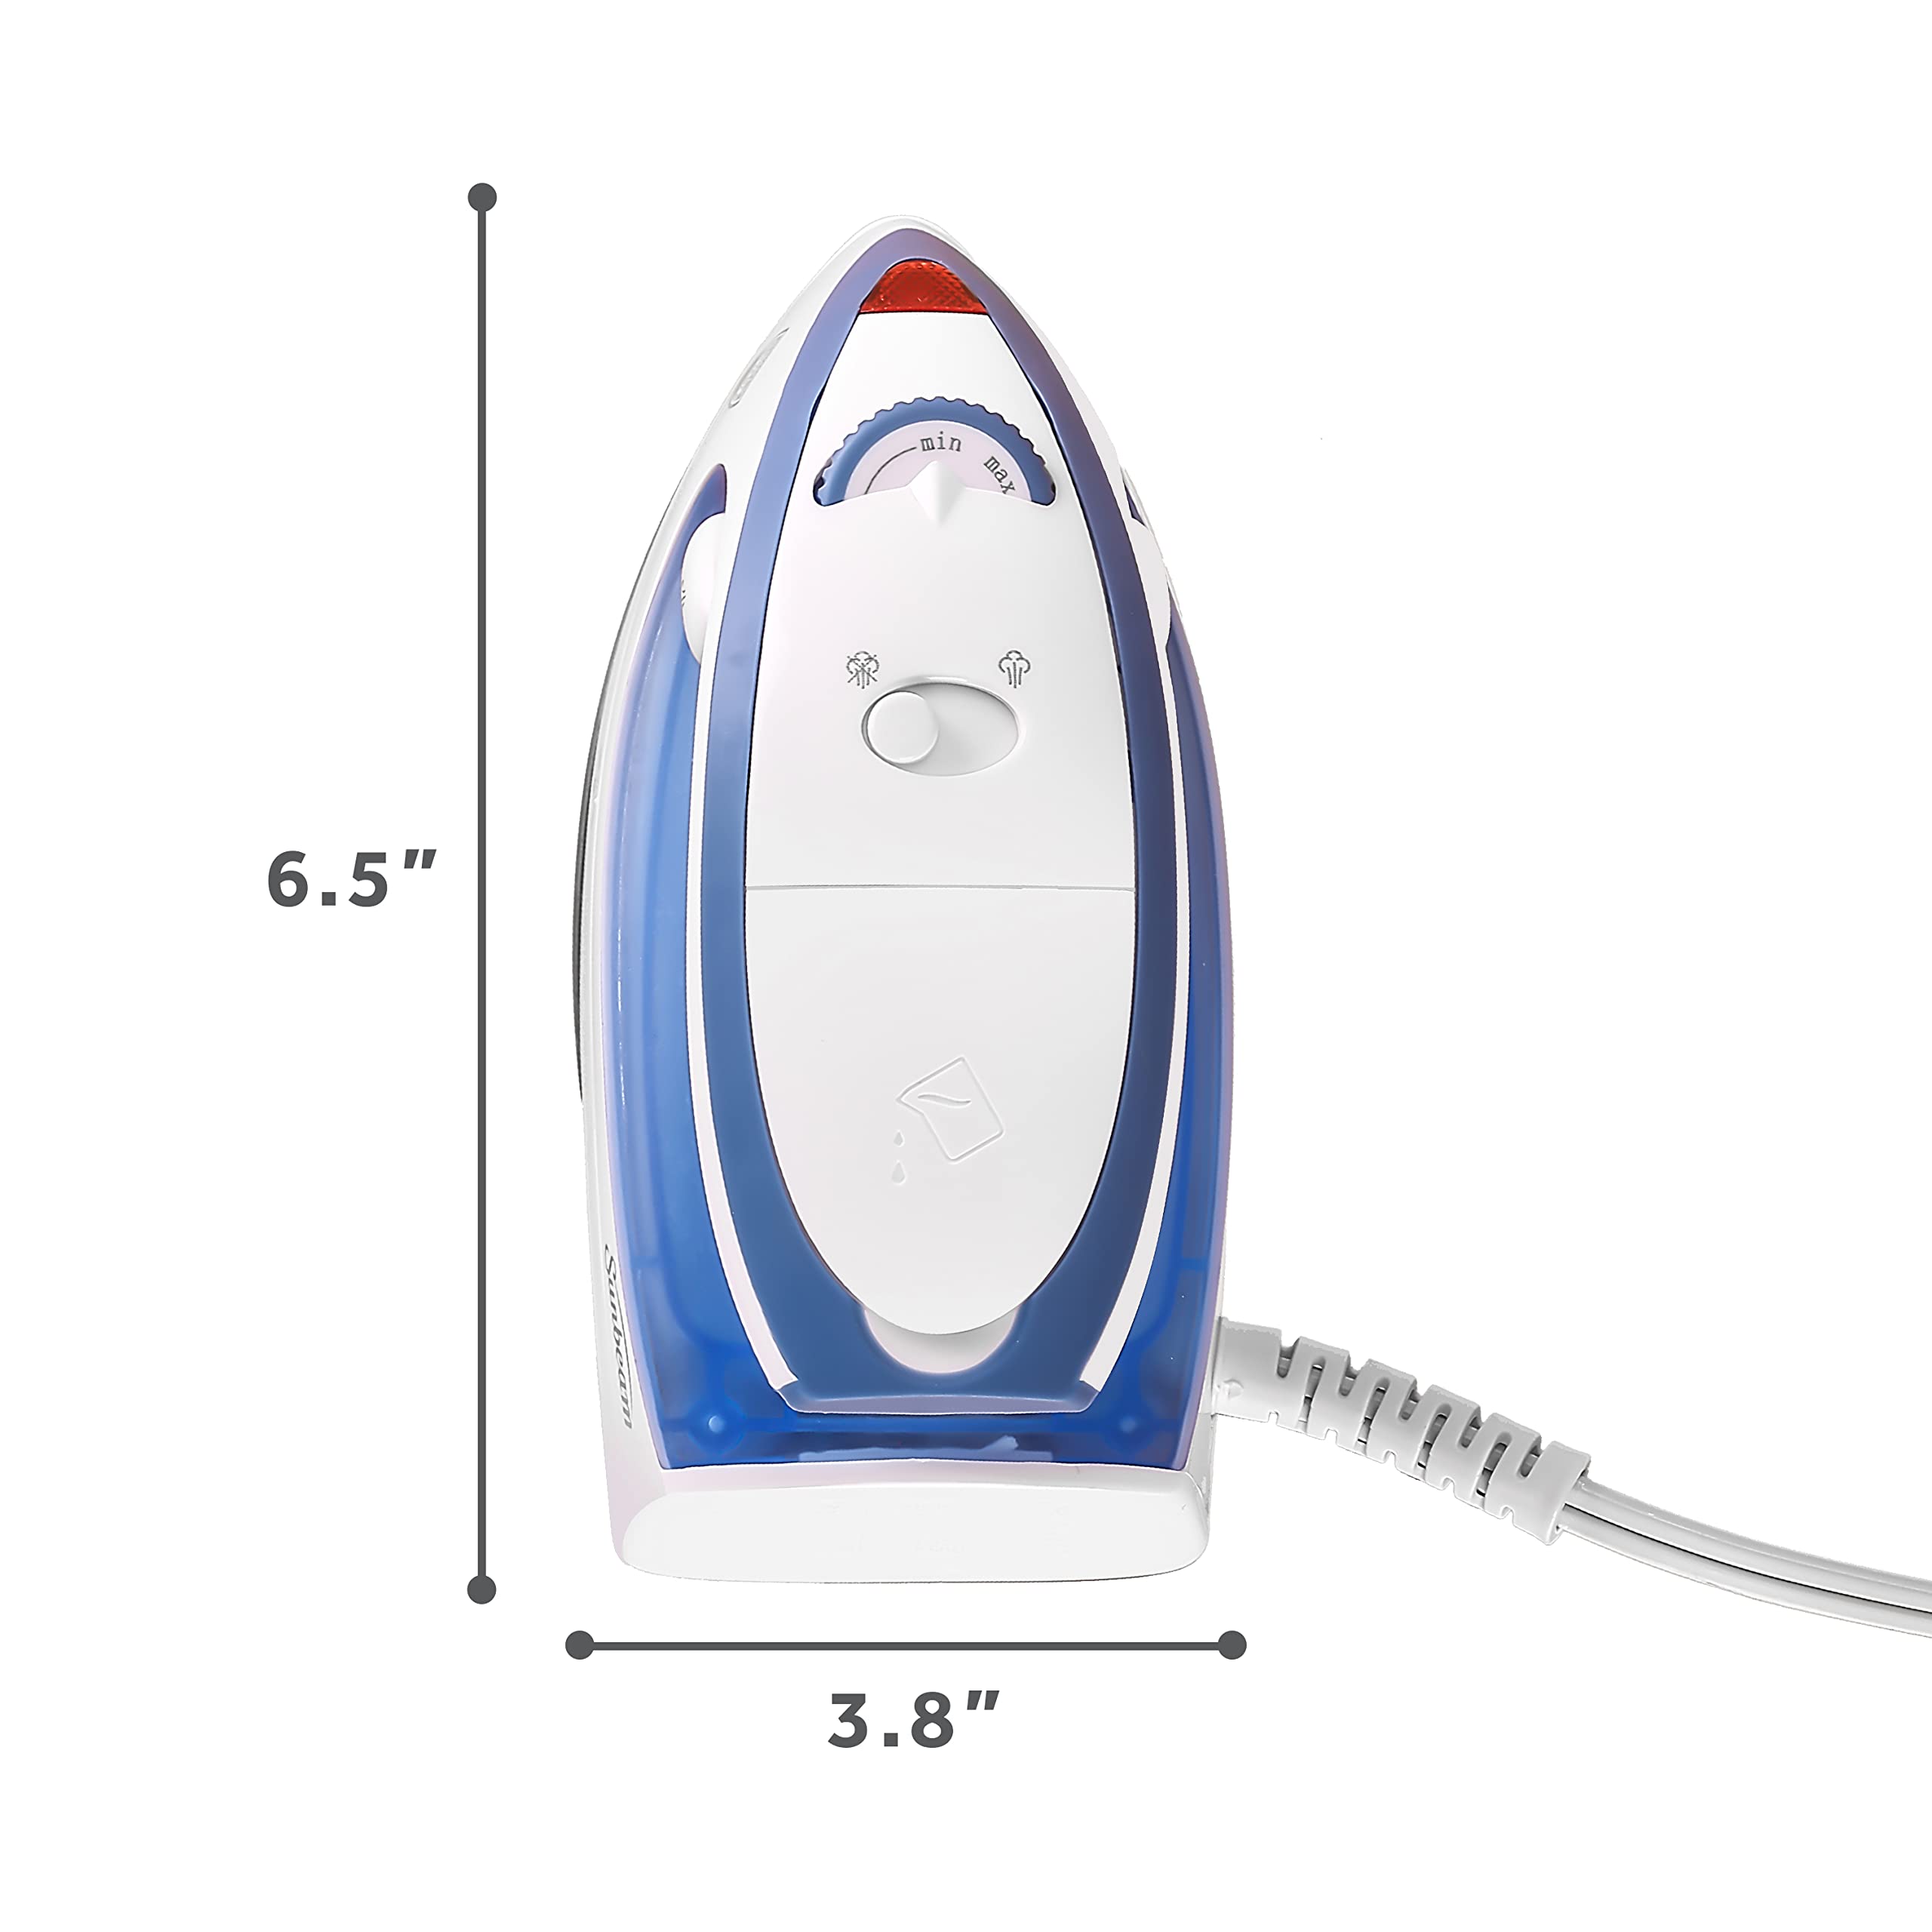 Sunbeam Hot-2-Trot Travel Steam Iron, 800 Watt Dual Voltage 120/240, Compact Size, Portable, Non-Stick Soleplate, Soft Touch Handle, Horizontal or Vertical Use, White and Blue